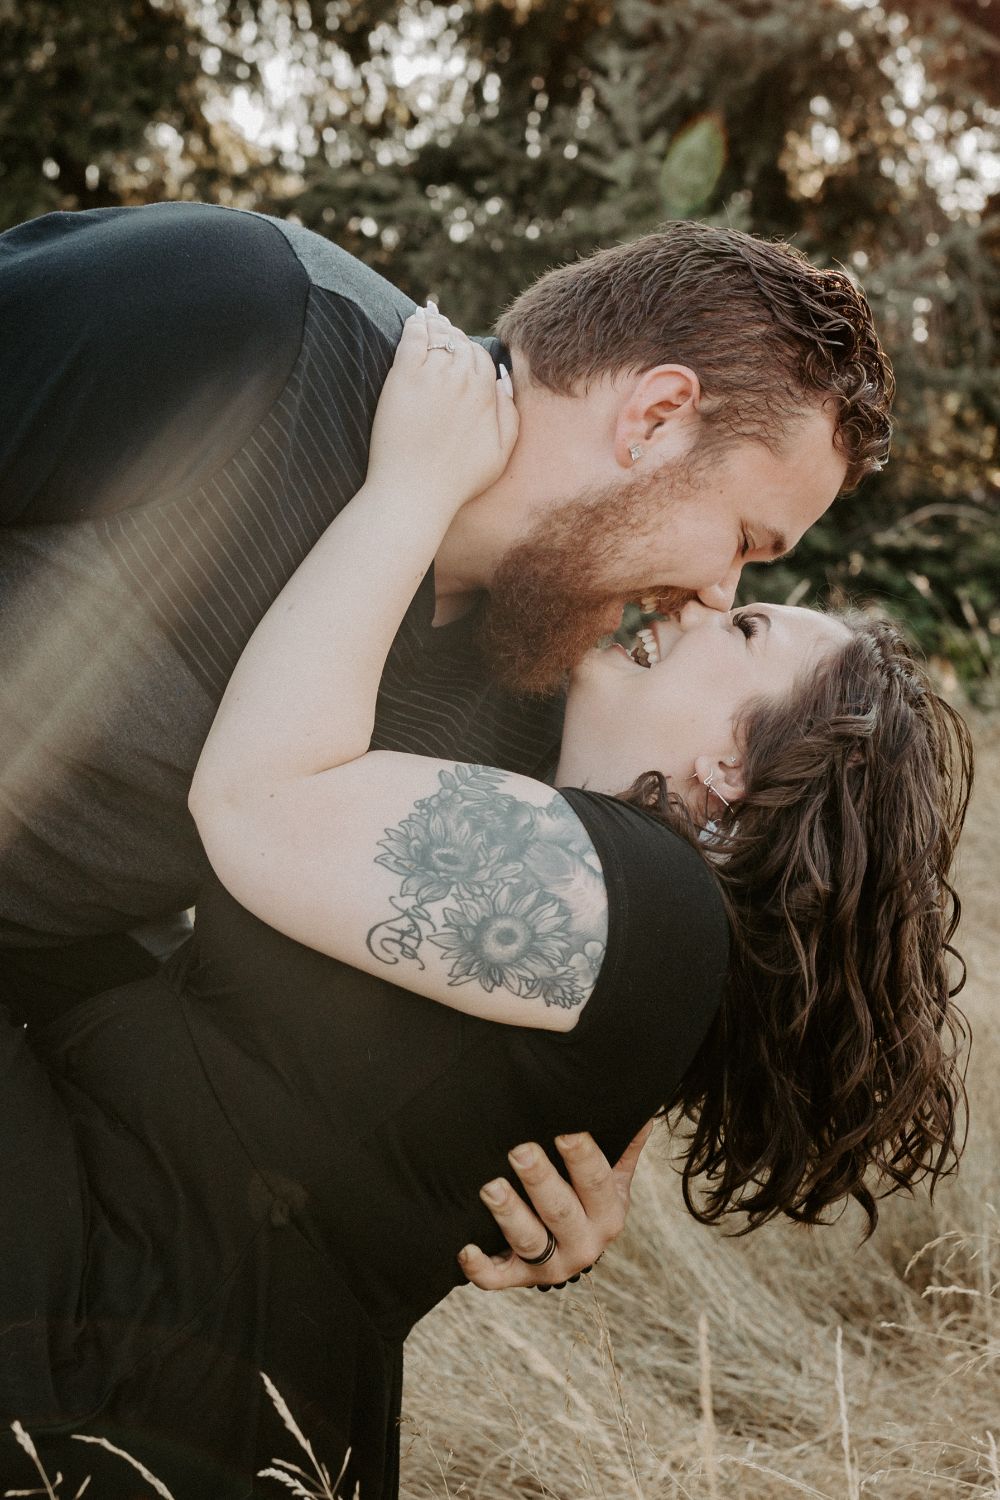 best time to take engagement photos outside, where to take engagement photos near me